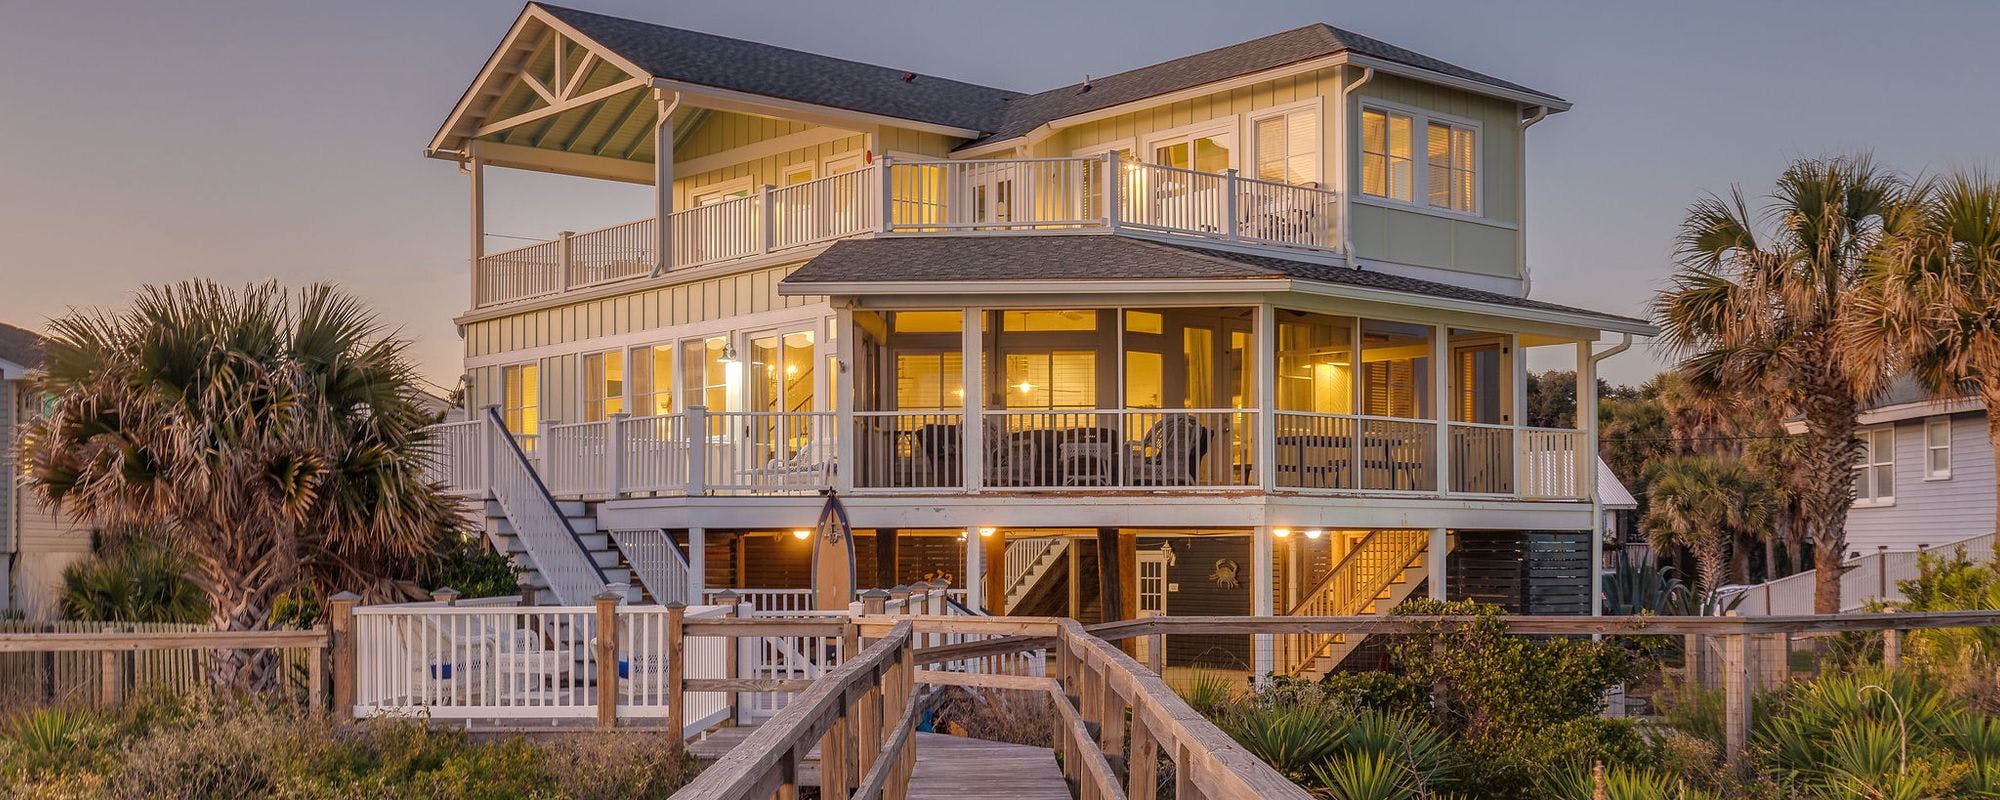 Exterior view of a Folly Beach vacation rental home.